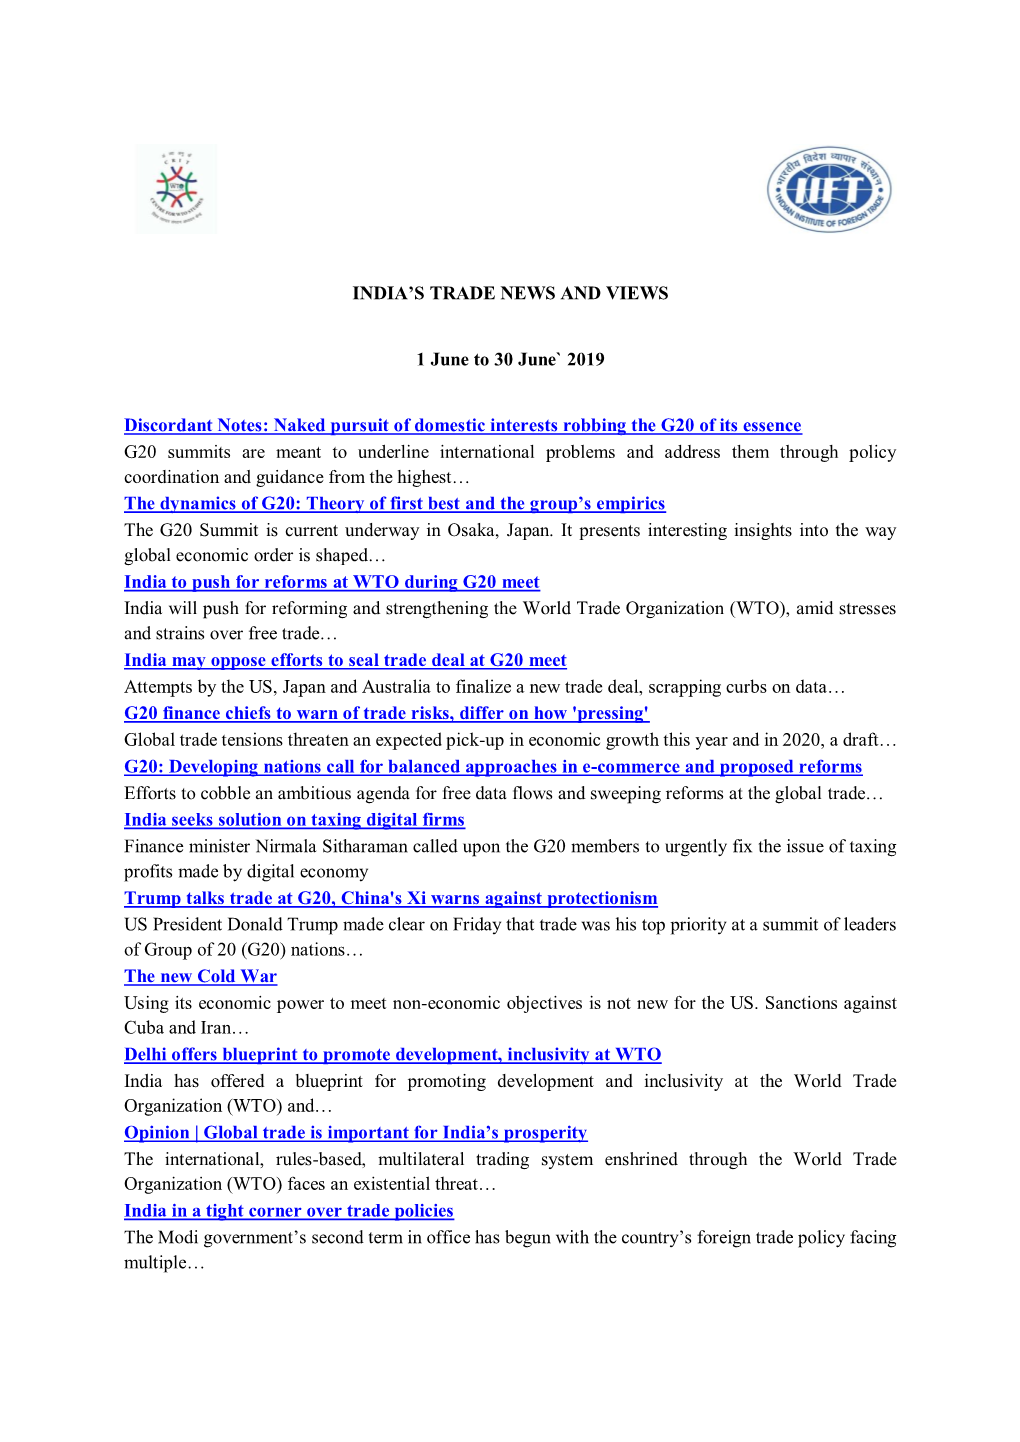 India's Trade News and Views- 1 June to 30 June 2019